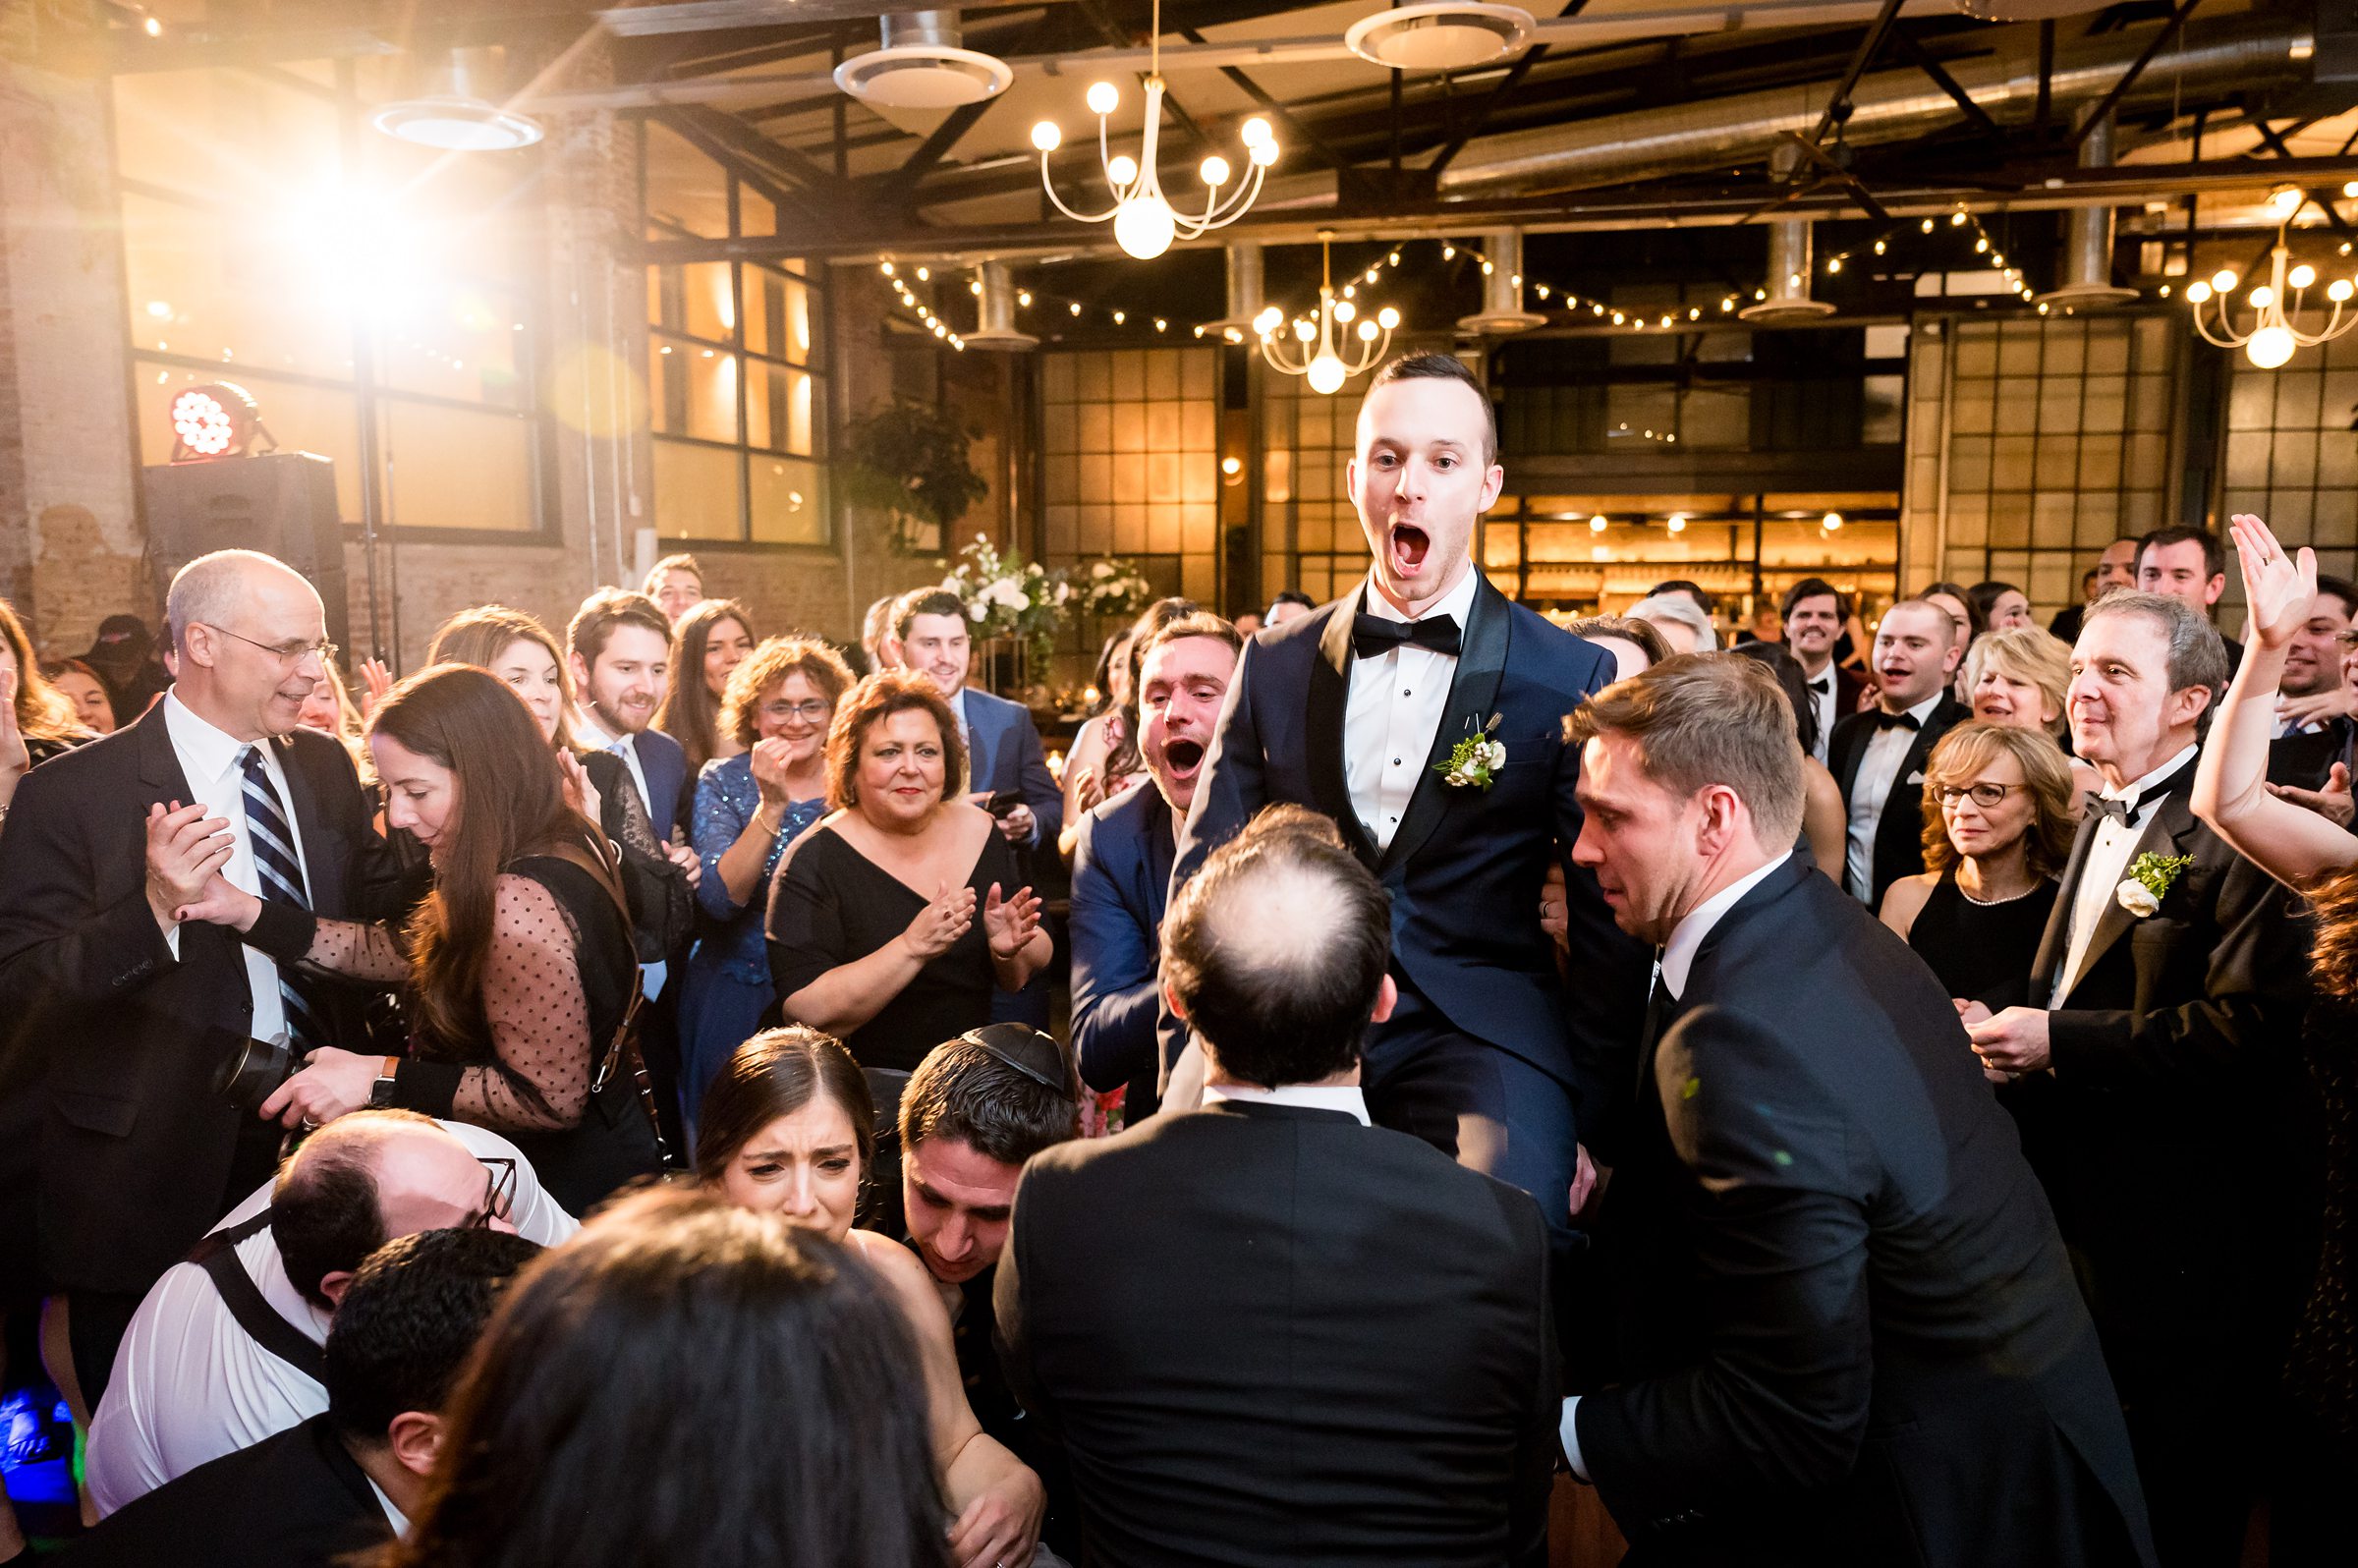 At a Lilah Events wedding, a man in a tuxedo is lifted up by a crowd of people.